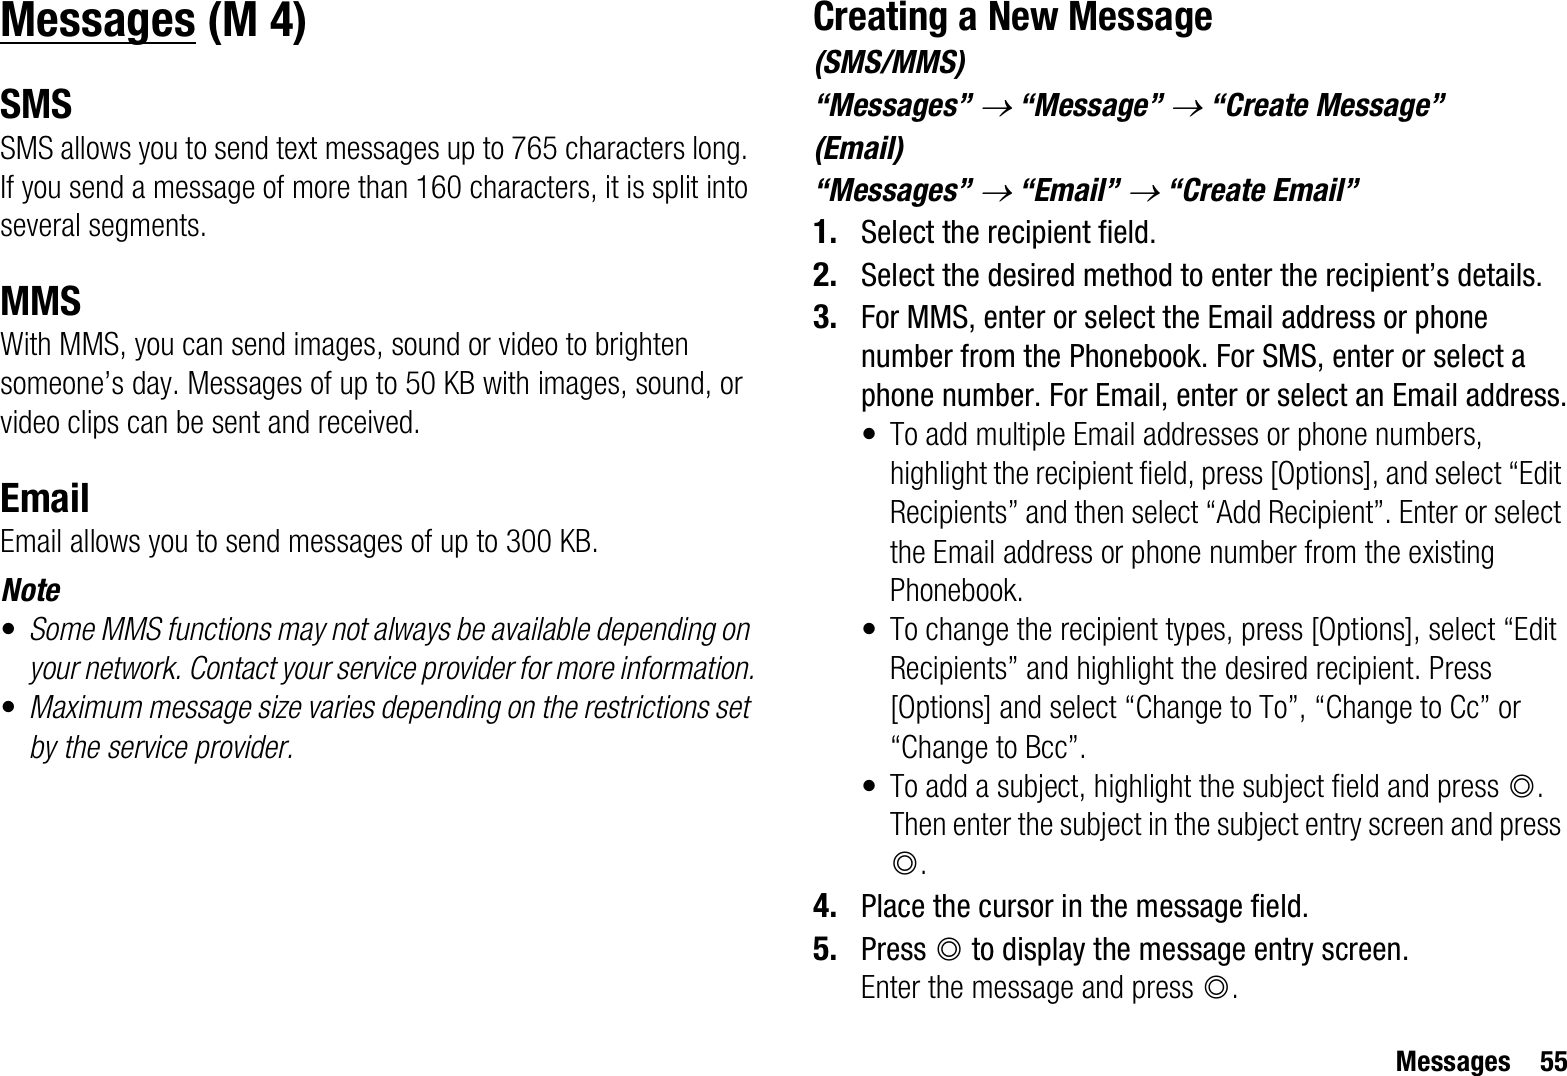 Messages 55MessagesSMSSMS allows you to send text messages up to 765 characters long. If you send a message of more than 160 characters, it is split into several segments.MMSWith MMS, you can send images, sound or video to brighten someone’s day. Messages of up to 50 KB with images, sound, or video clips can be sent and received. EmailEmail allows you to send messages of up to 300 KB.Note•Some MMS functions may not always be available depending on your network. Contact your service provider for more information.•Maximum message size varies depending on the restrictions set by the service provider.Creating a New Message(SMS/MMS)“Messages” o “Message” o “Create Message”(Email)“Messages” o “Email” o “Create Email”1. Select the recipient field.2. Select the desired method to enter the recipient’s details.3. For MMS, enter or select the Email address or phone number from the Phonebook. For SMS, enter or select a phone number. For Email, enter or select an Email address.• To add multiple Email addresses or phone numbers, highlight the recipient field, press [Options], and select “Edit Recipients” and then select “Add Recipient”. Enter or select the Email address or phone number from the existing Phonebook.• To change the recipient types, press [Options], select “Edit Recipients” and highlight the desired recipient. Press [Options] and select “Change to To”, “Change to Cc” or “Change to Bcc”.• To add a subject, highlight the subject field and press B.Then enter the subject in the subject entry screen and press B.4. Place the cursor in the message field.5. Press B to display the message entry screen.Enter the message and press B. (M 4)